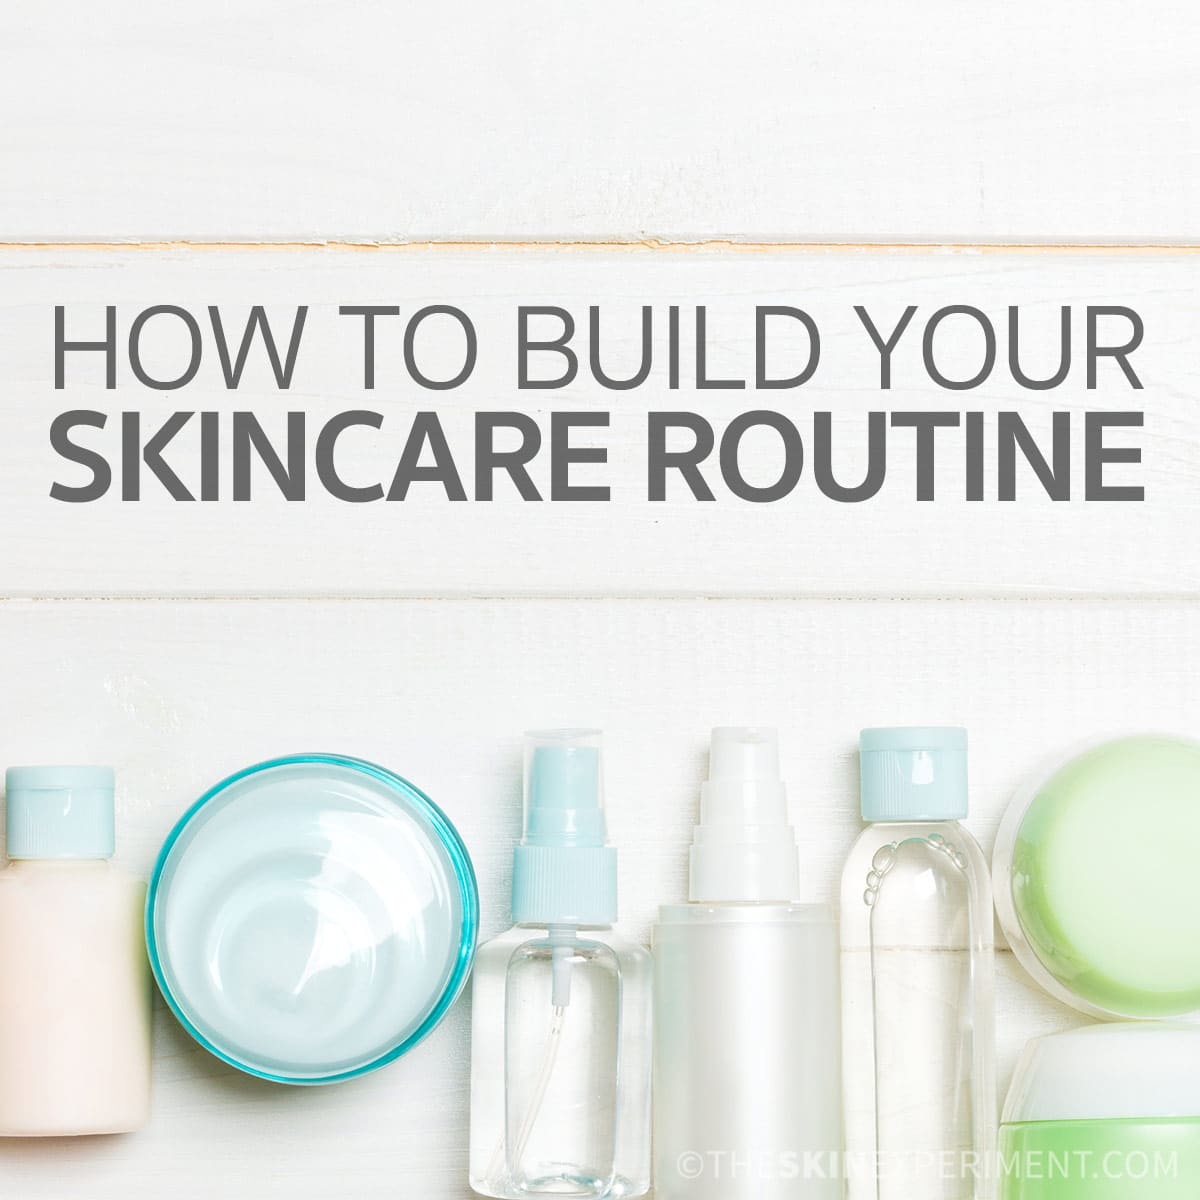 Building a Skincare Routine: A Complete Guide - Health Overdosed